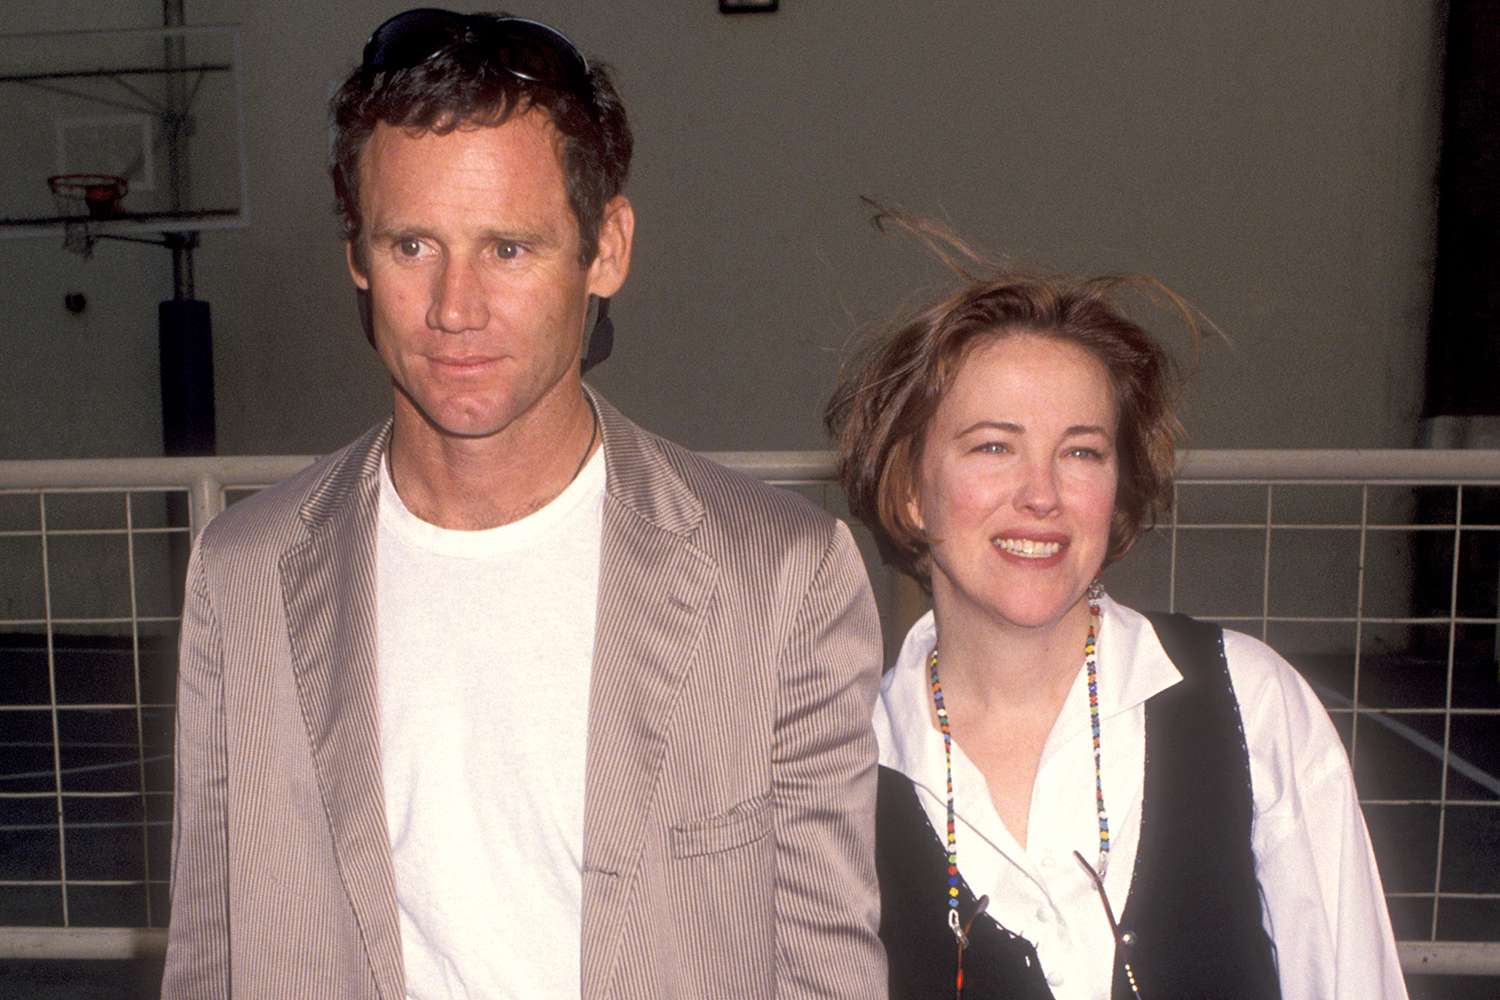 Actress Catherine O'Hara and husband Bo Welch attend the Fifth Annual Project Robin Hood Food Drive to Benefit Love Is Feeding Everyone (L.I.F.E.) on June 26, 1993 at Paramount Studios in Hollywood, California.